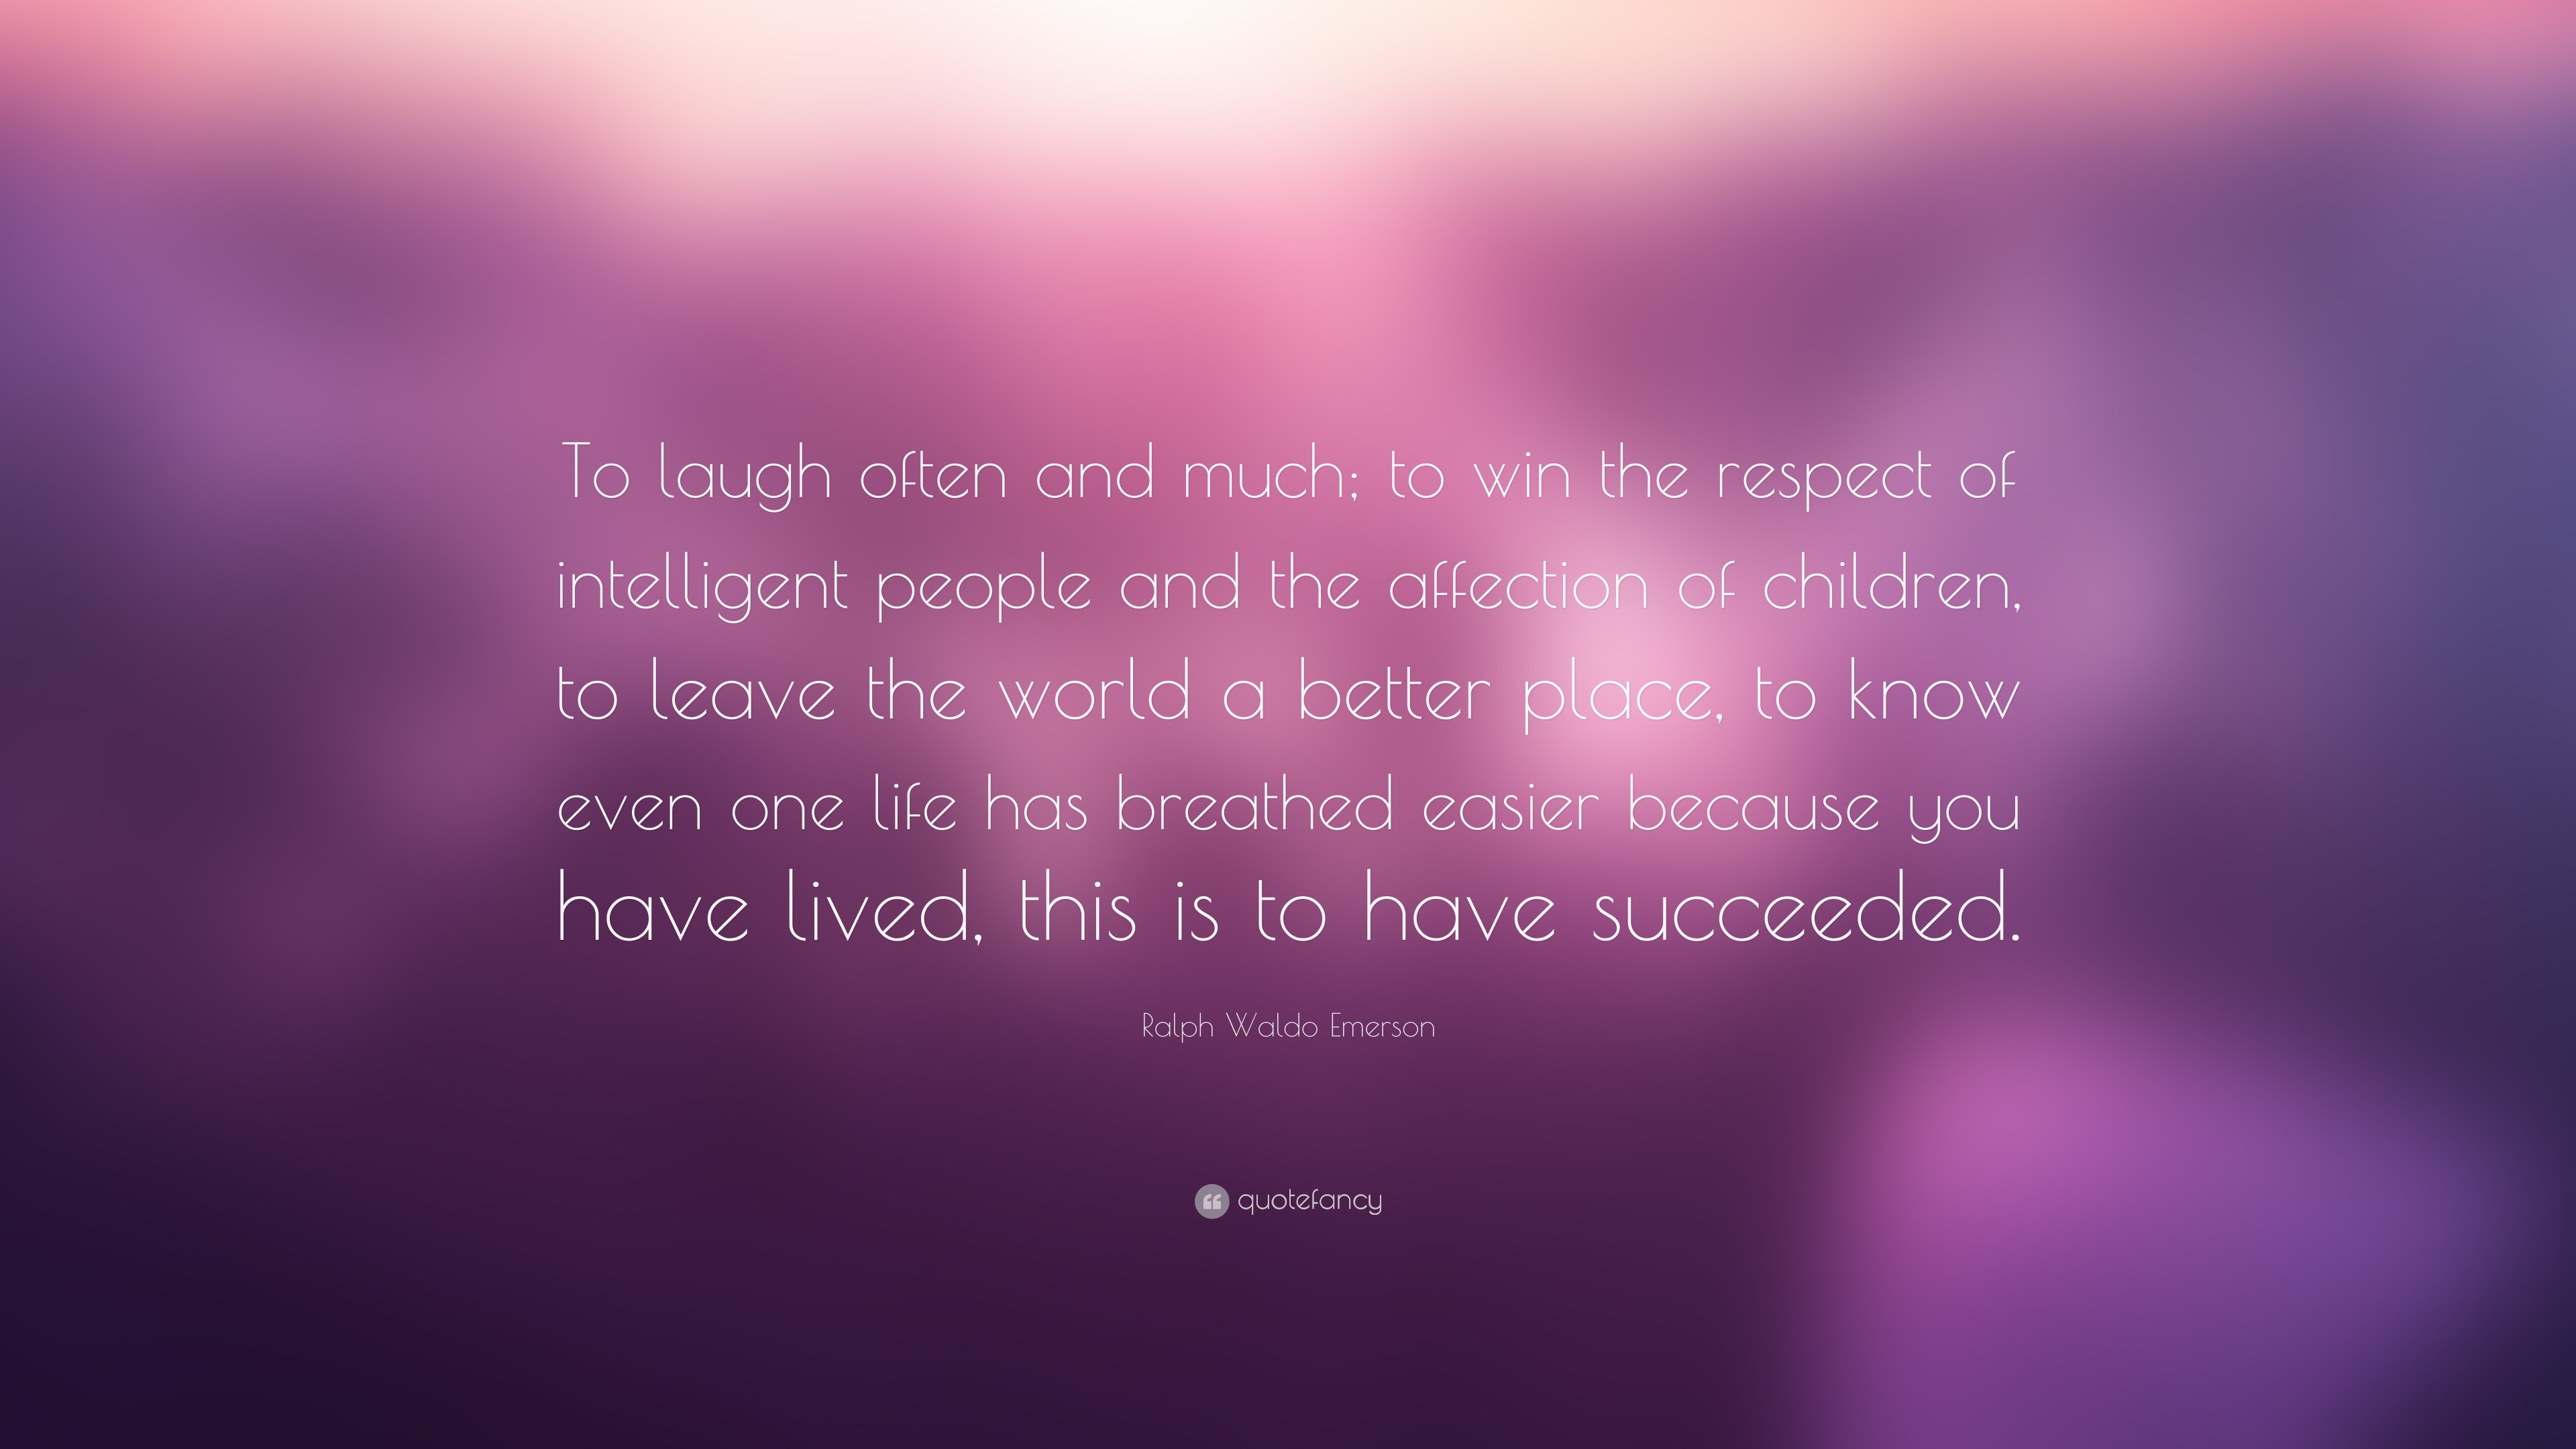 Ralph Waldo Emerson Quote “To laugh often and much to win the respect